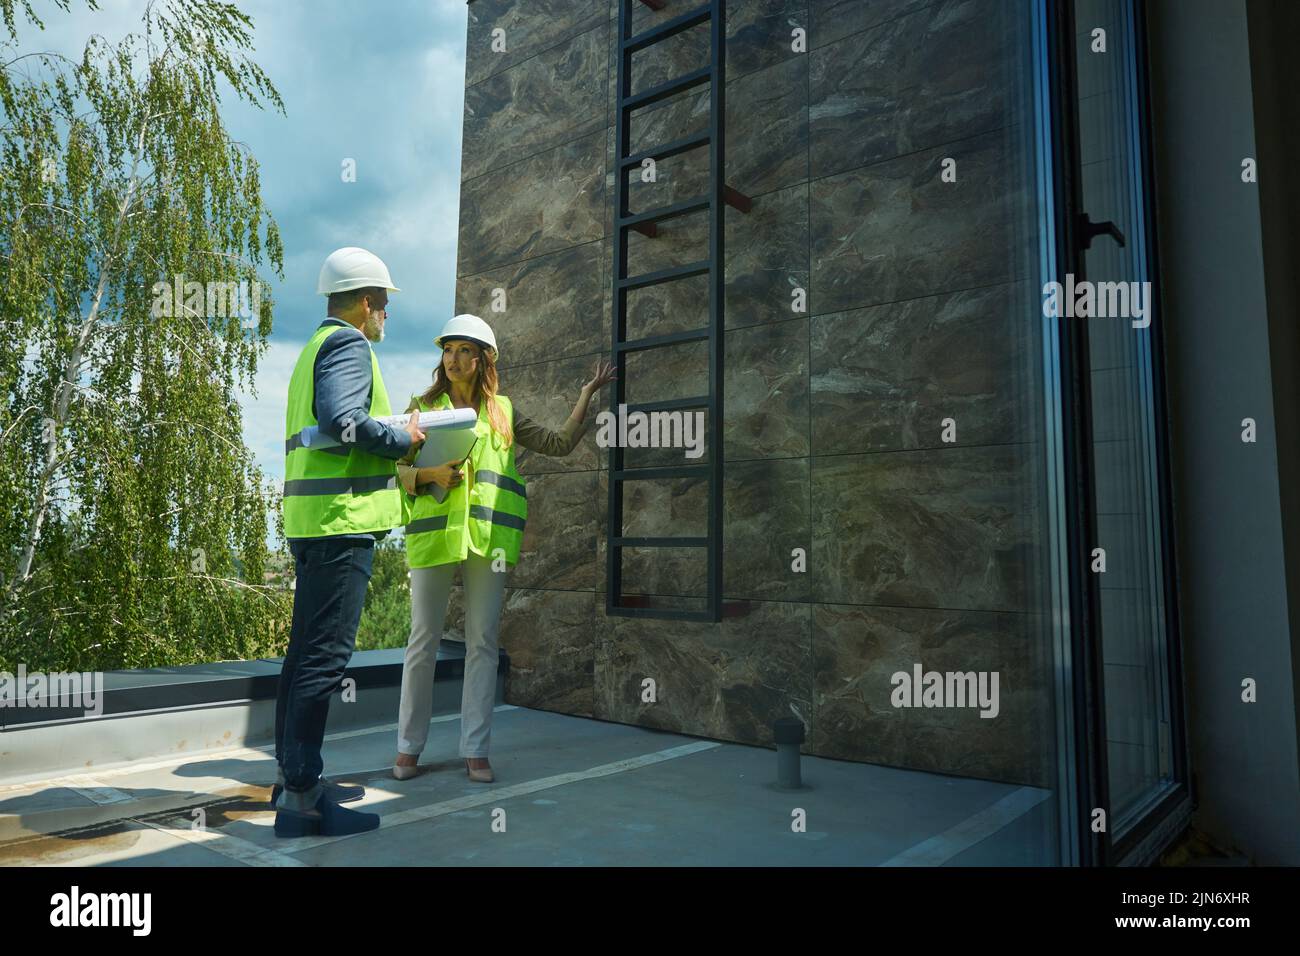 Manager in protective helmet is talking to foreman on balcony Stock Photo